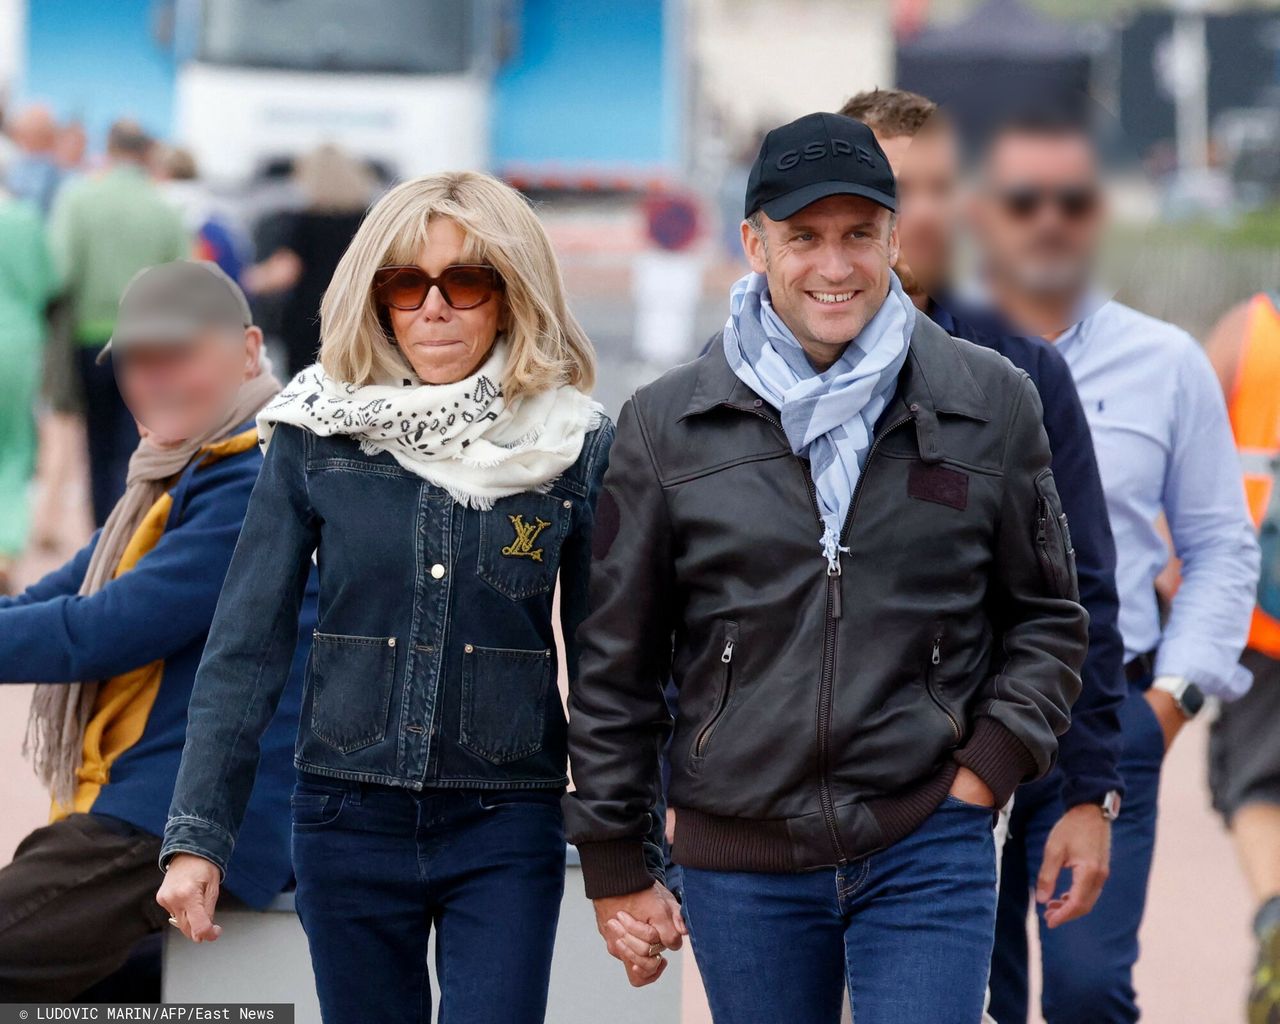 Brigitte Macron with her husband in unconventional outfits at air shows